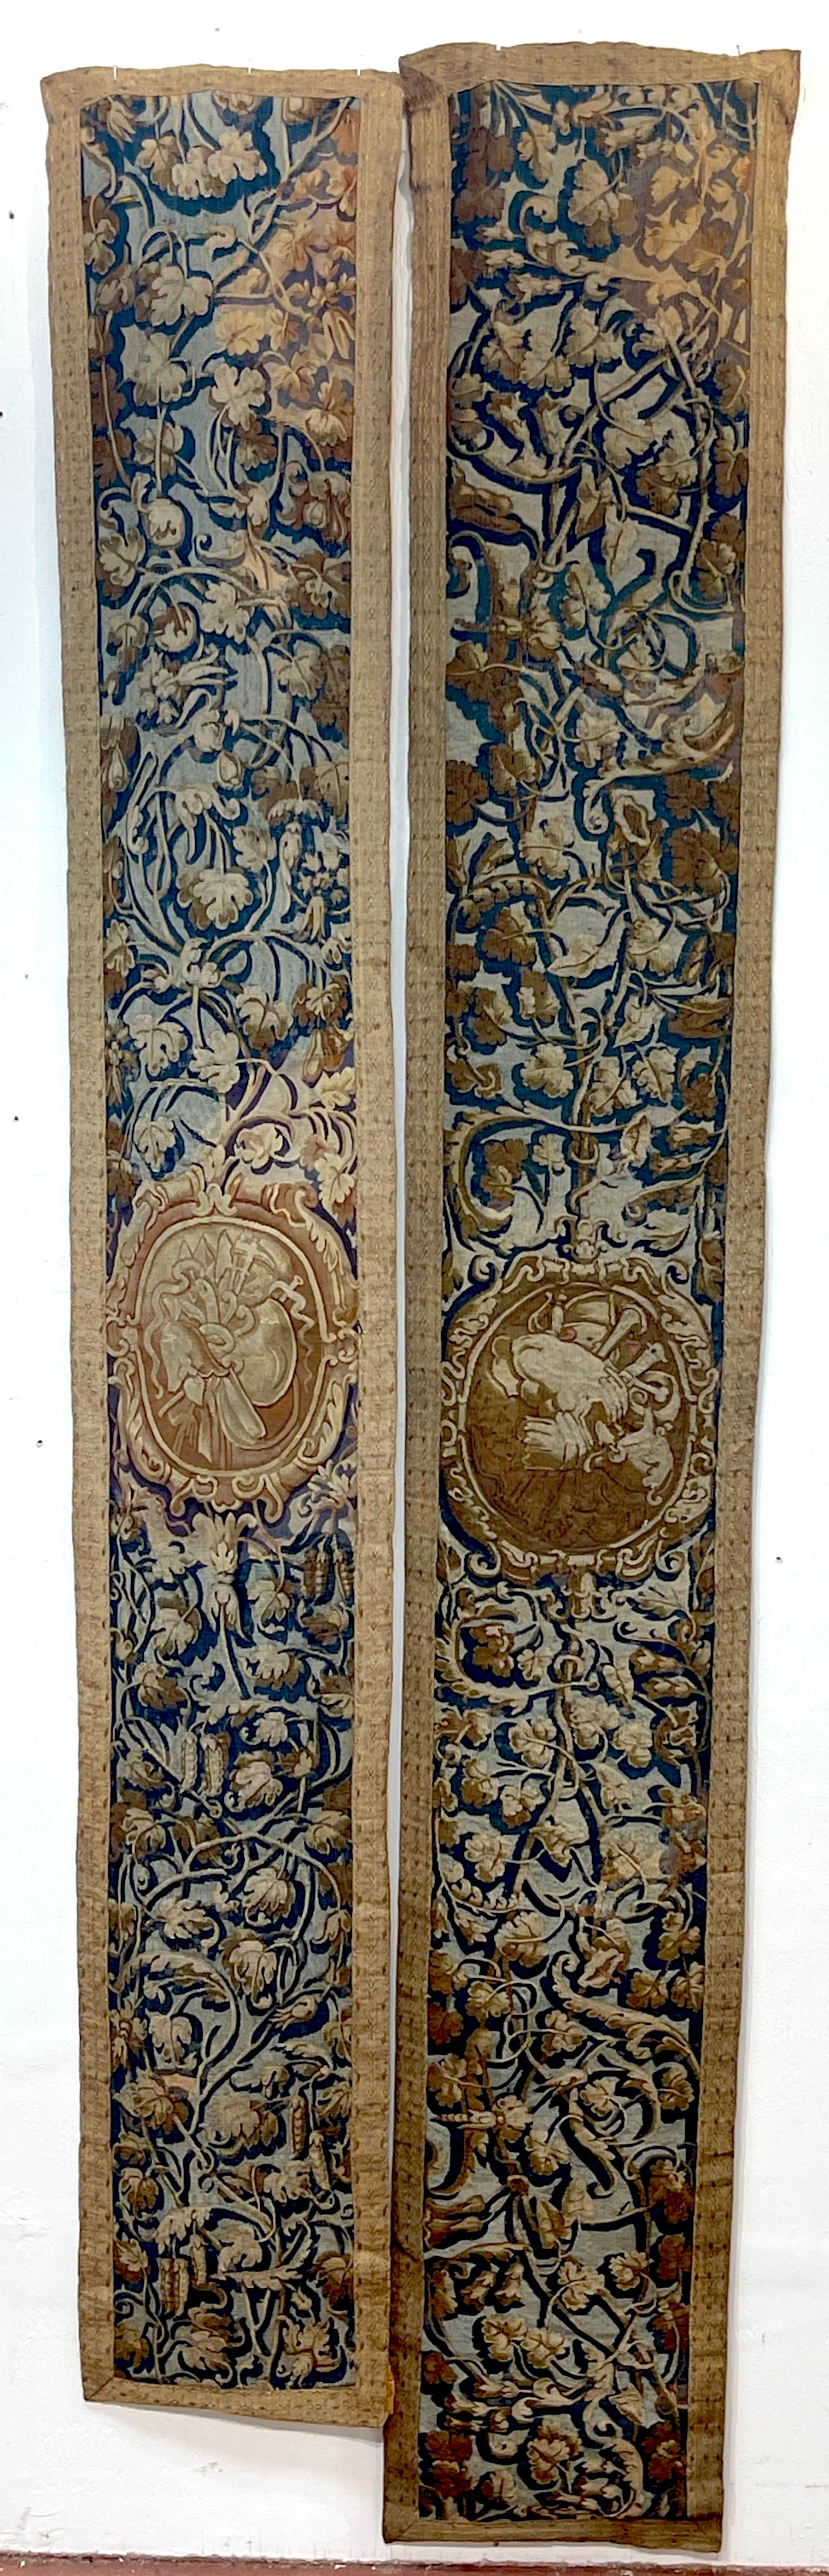 A Near Pair of Antique 17th-C. Belgium Flemish Tapestry Portière (Border) Panels
Belgium, 17th century  

Presenting a rare and exquisite pair of antique 17th-century Belgium Flemish Tapestry Portière Panels, these stunning pieces offer a glimpse